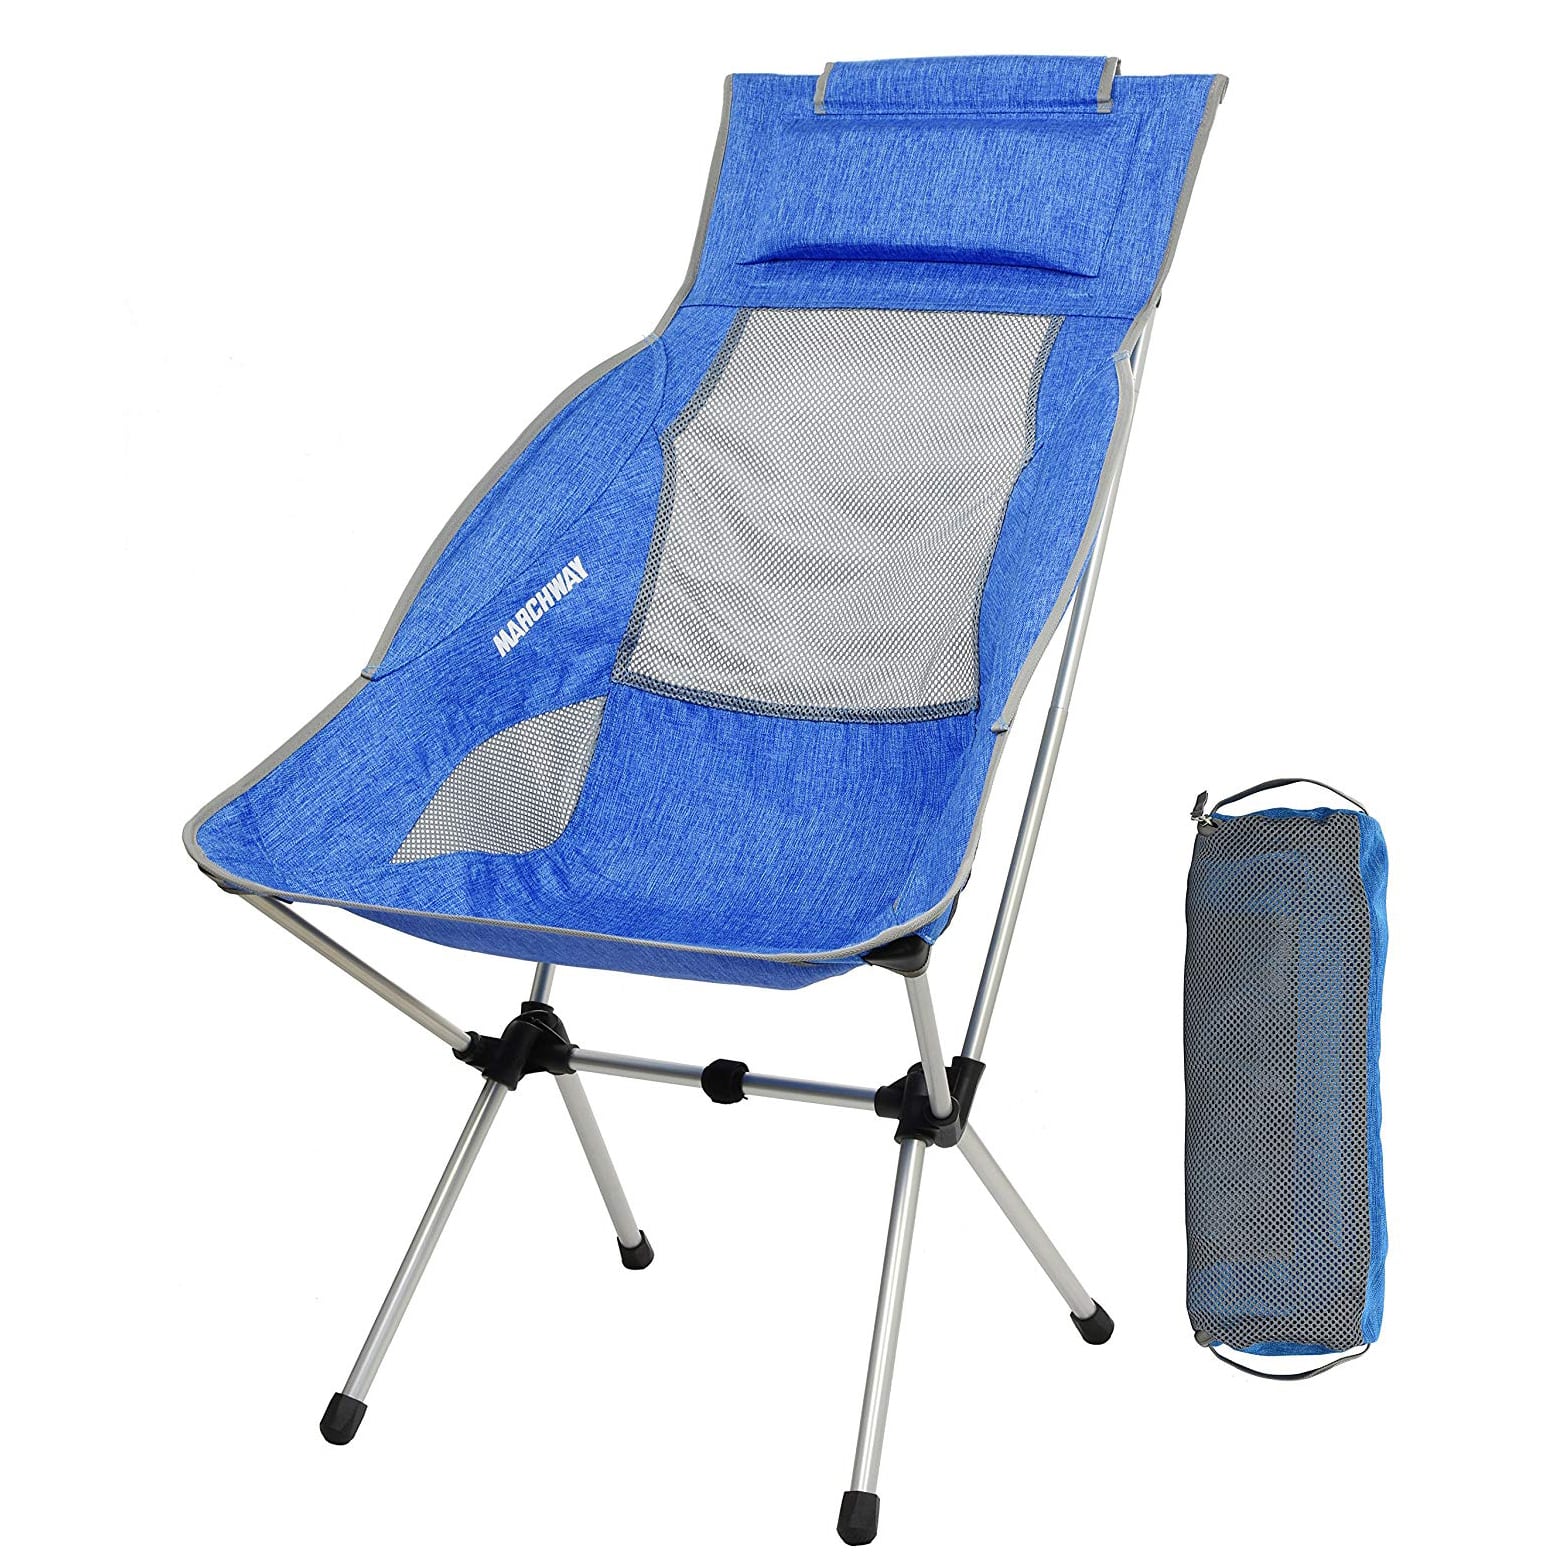 10. MARCHWAY Lightweight Folding Camping Chair With A Headrest 